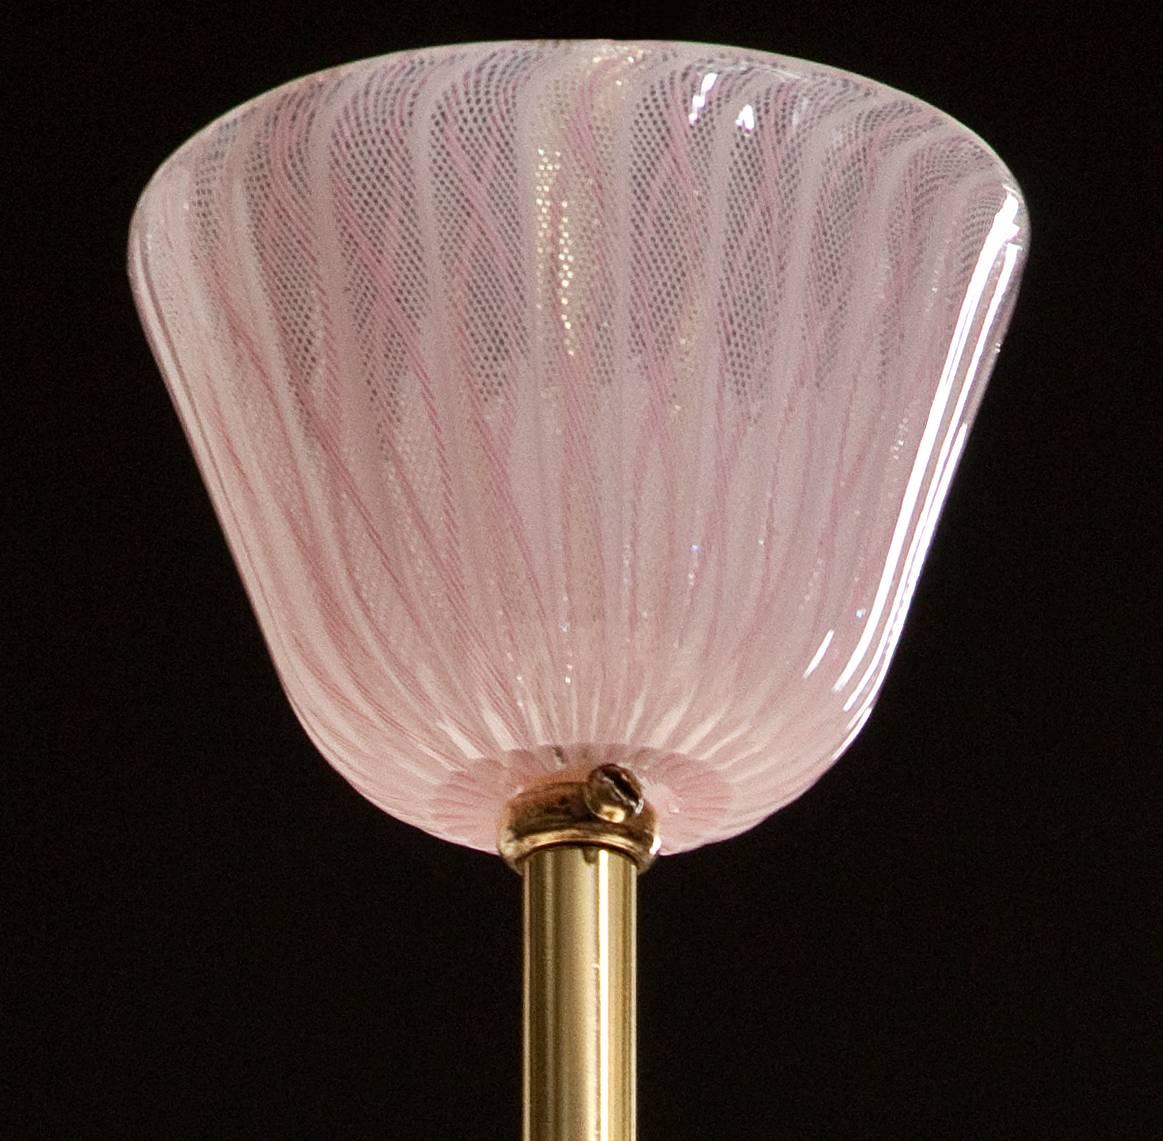 The conforming glass canopy, above a hanging rod, centering an ovoid pink filigrana glass diffuser.
The height can easily be adjusted. 
Overall height: 42.25